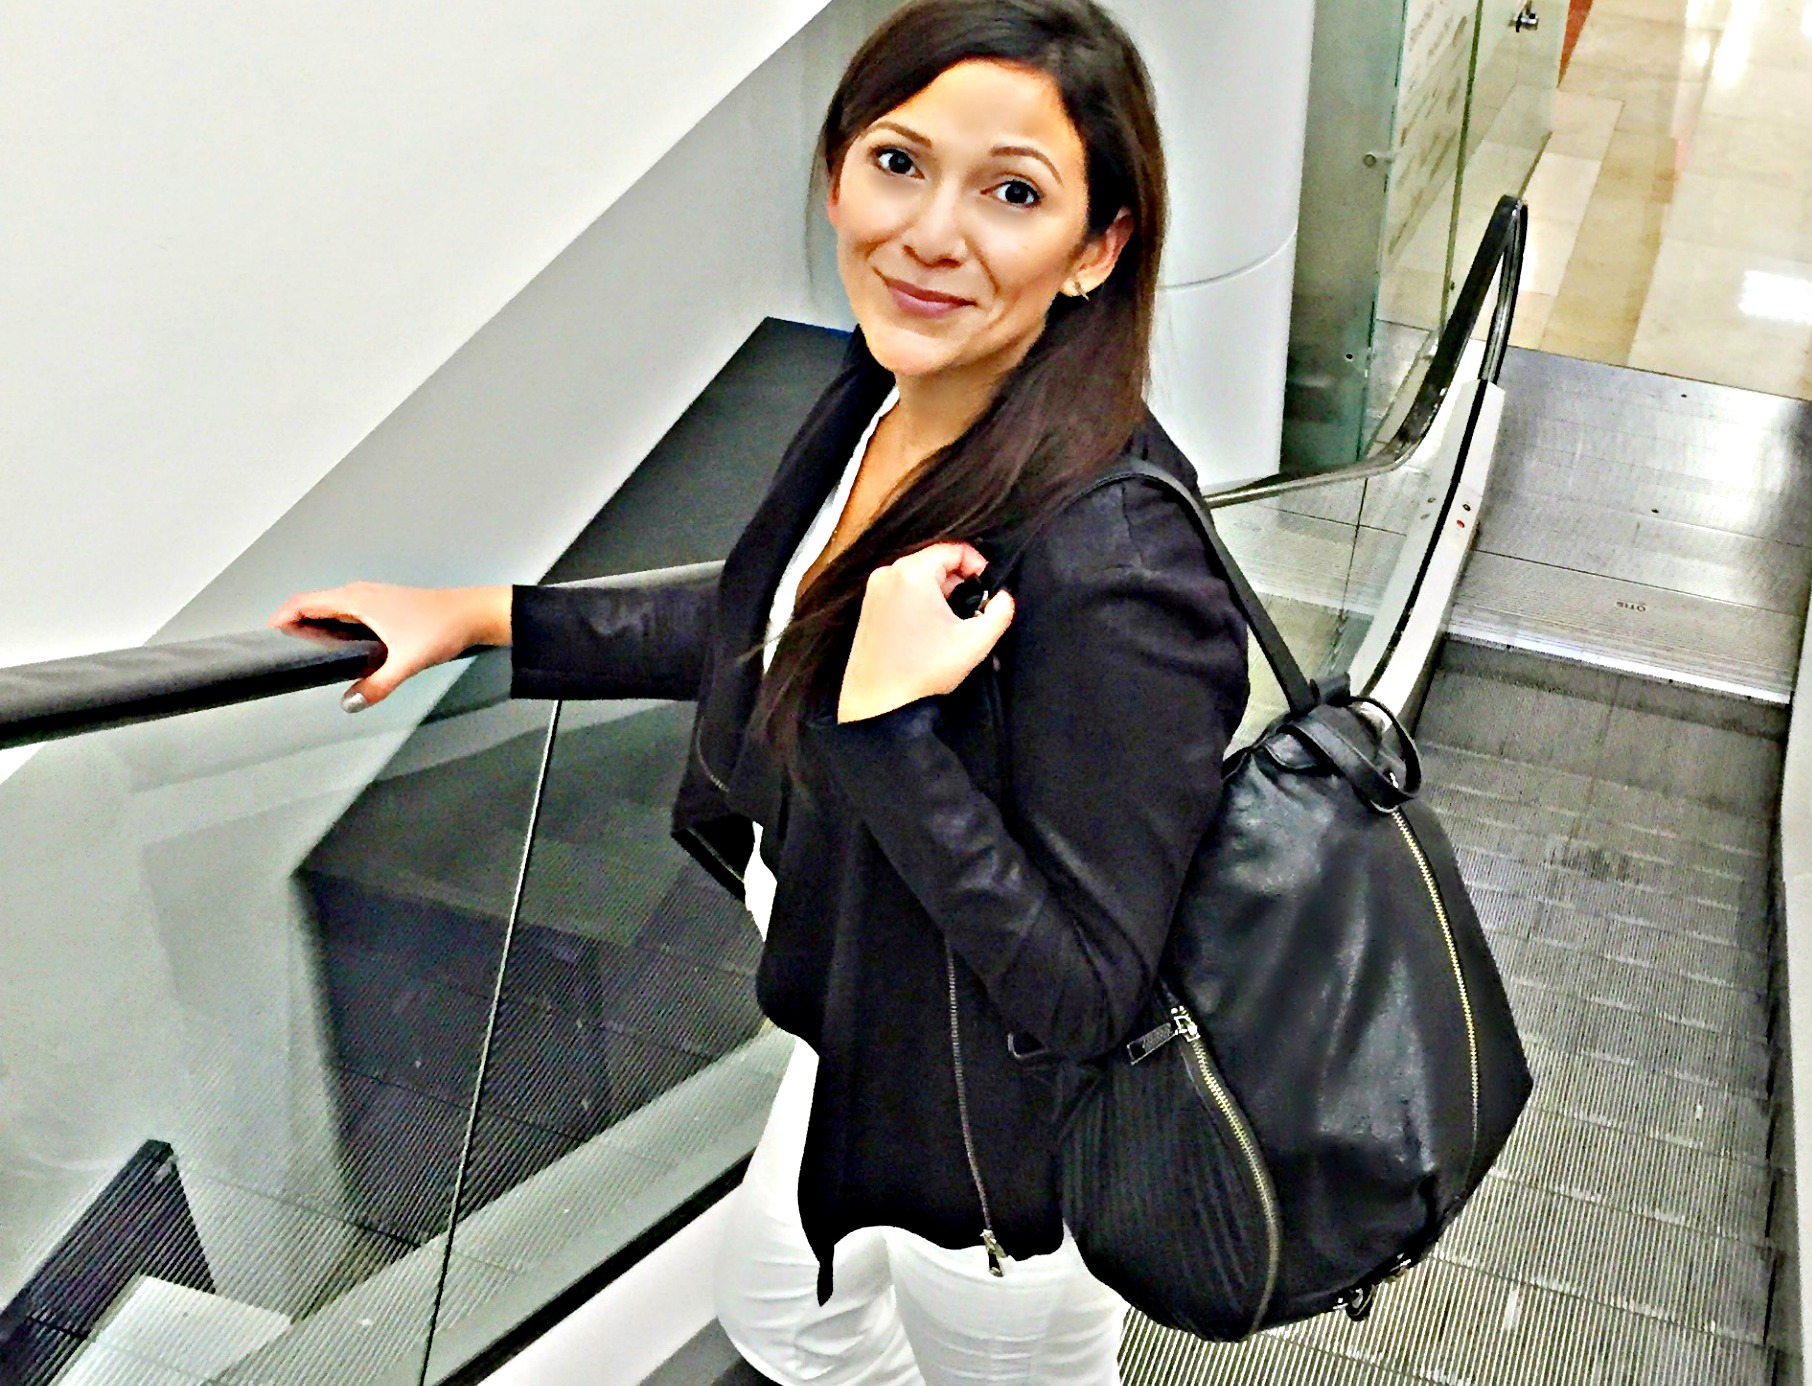 My Favorite Travel Bags I Can't Live Without!! – Rachel Parcell, Inc.